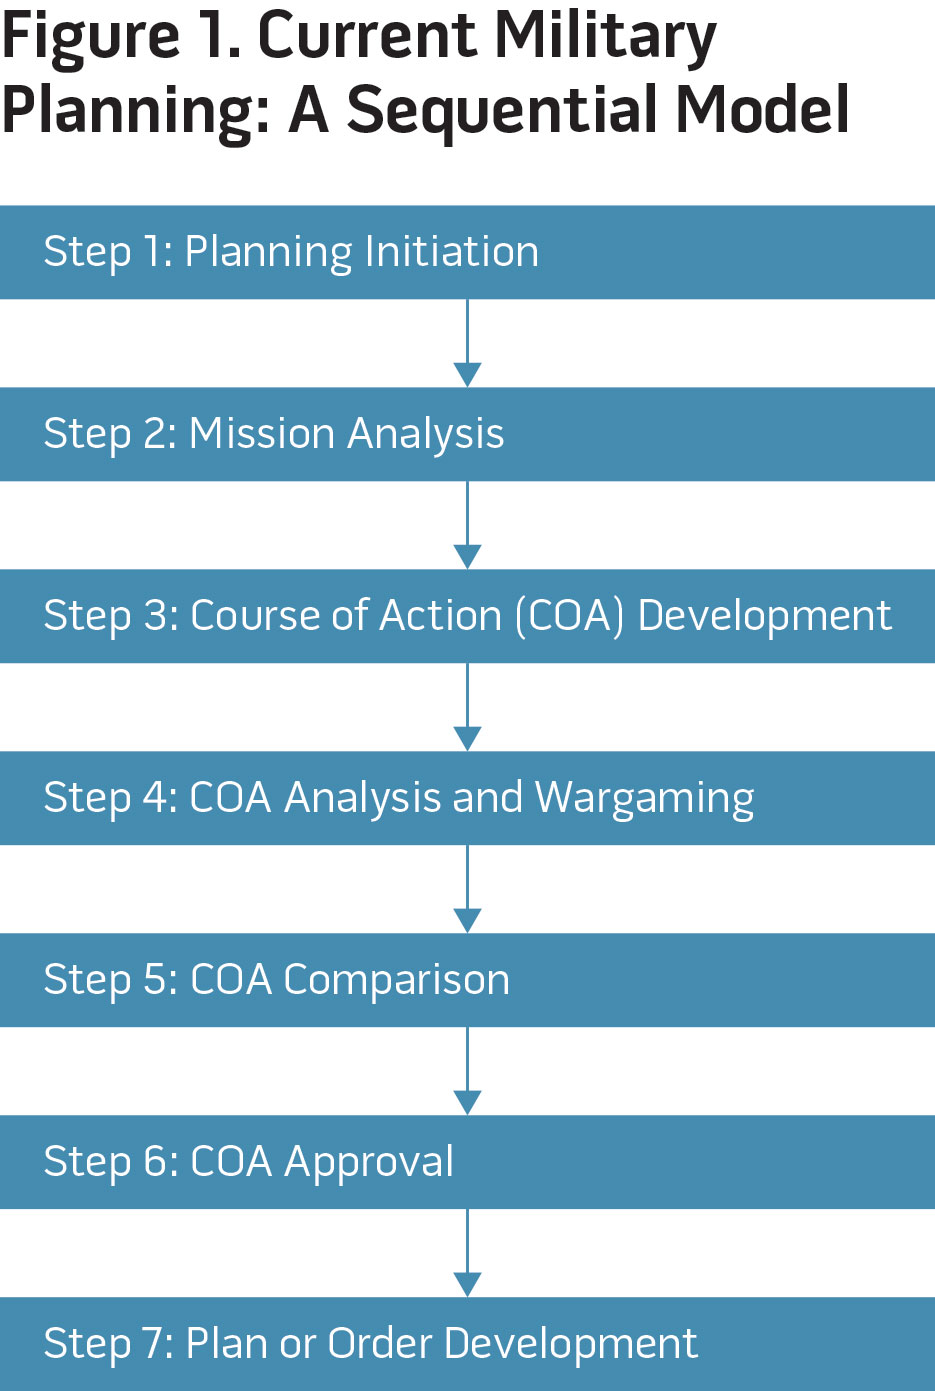 Figure 1. Current Military Planning: A Sequential Model